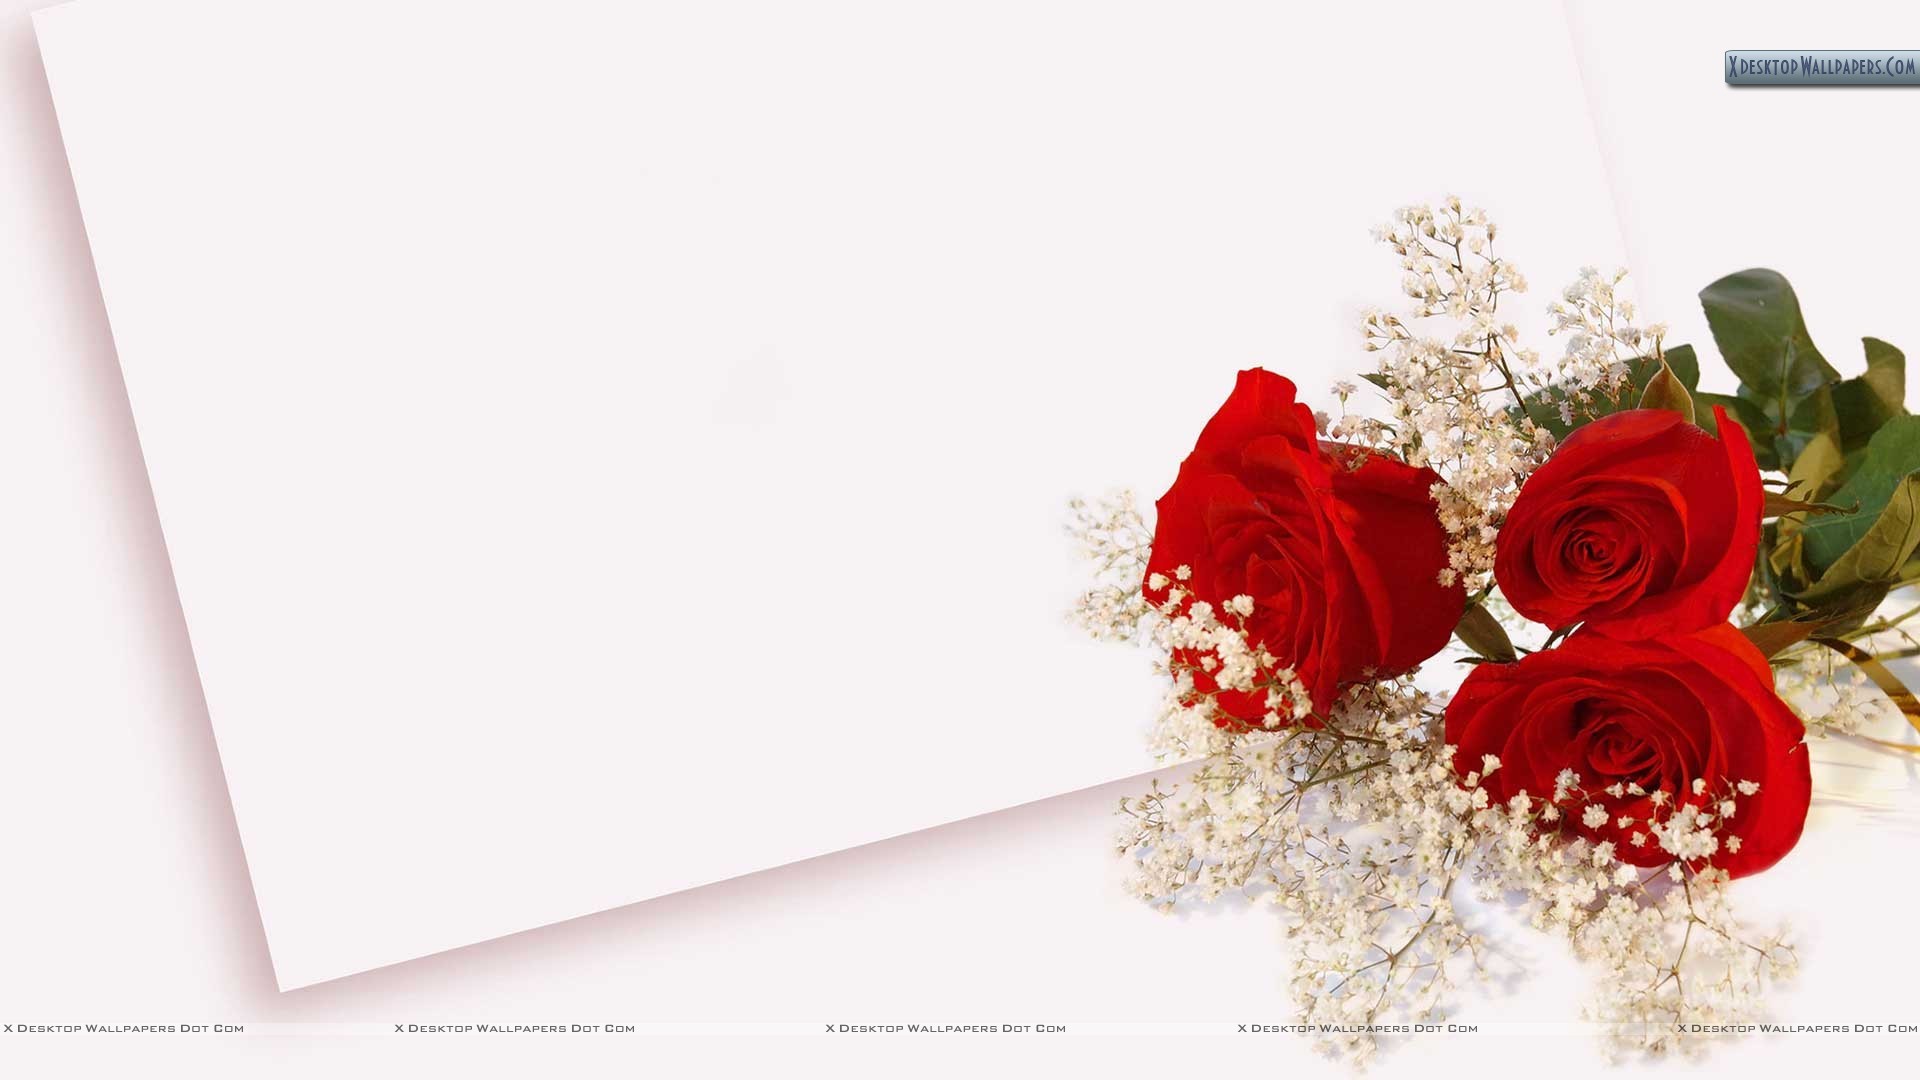 1920x1080 You are viewing wallpaper titled "Wedding Flowers ...